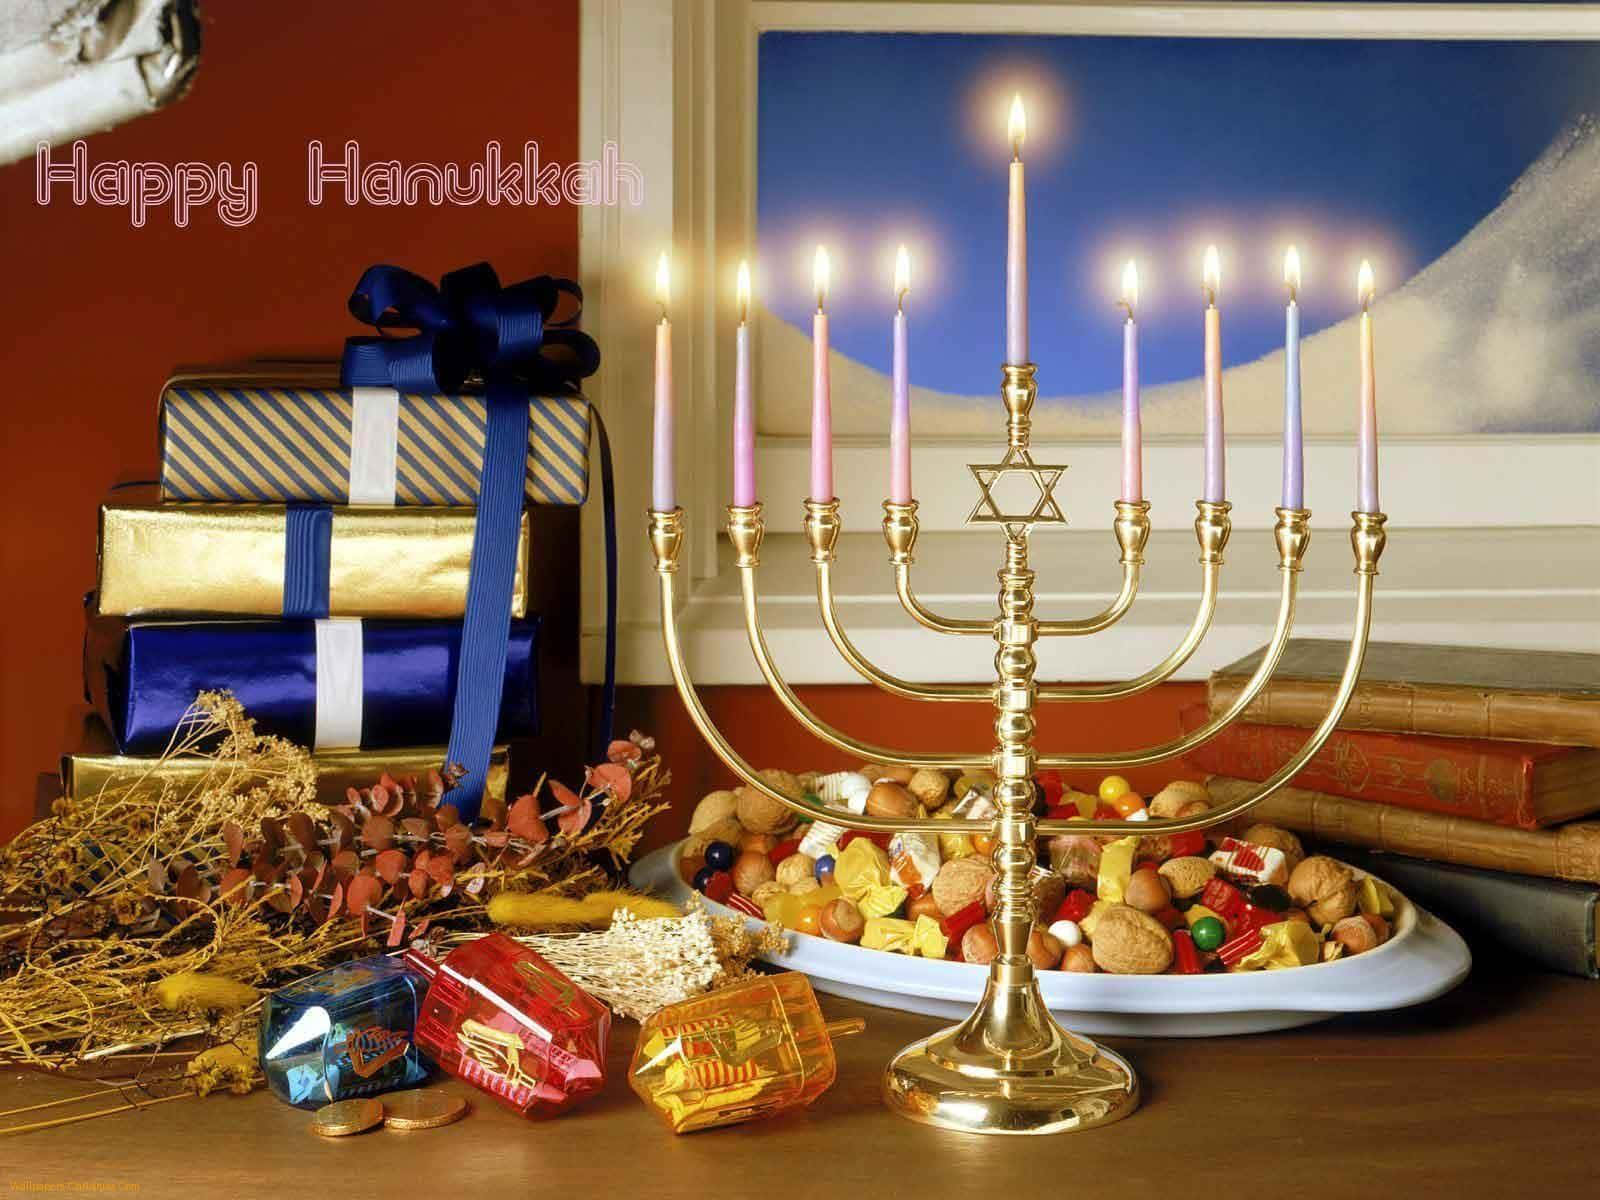 Celebrate the 8 days of Hanukkah with family and friends